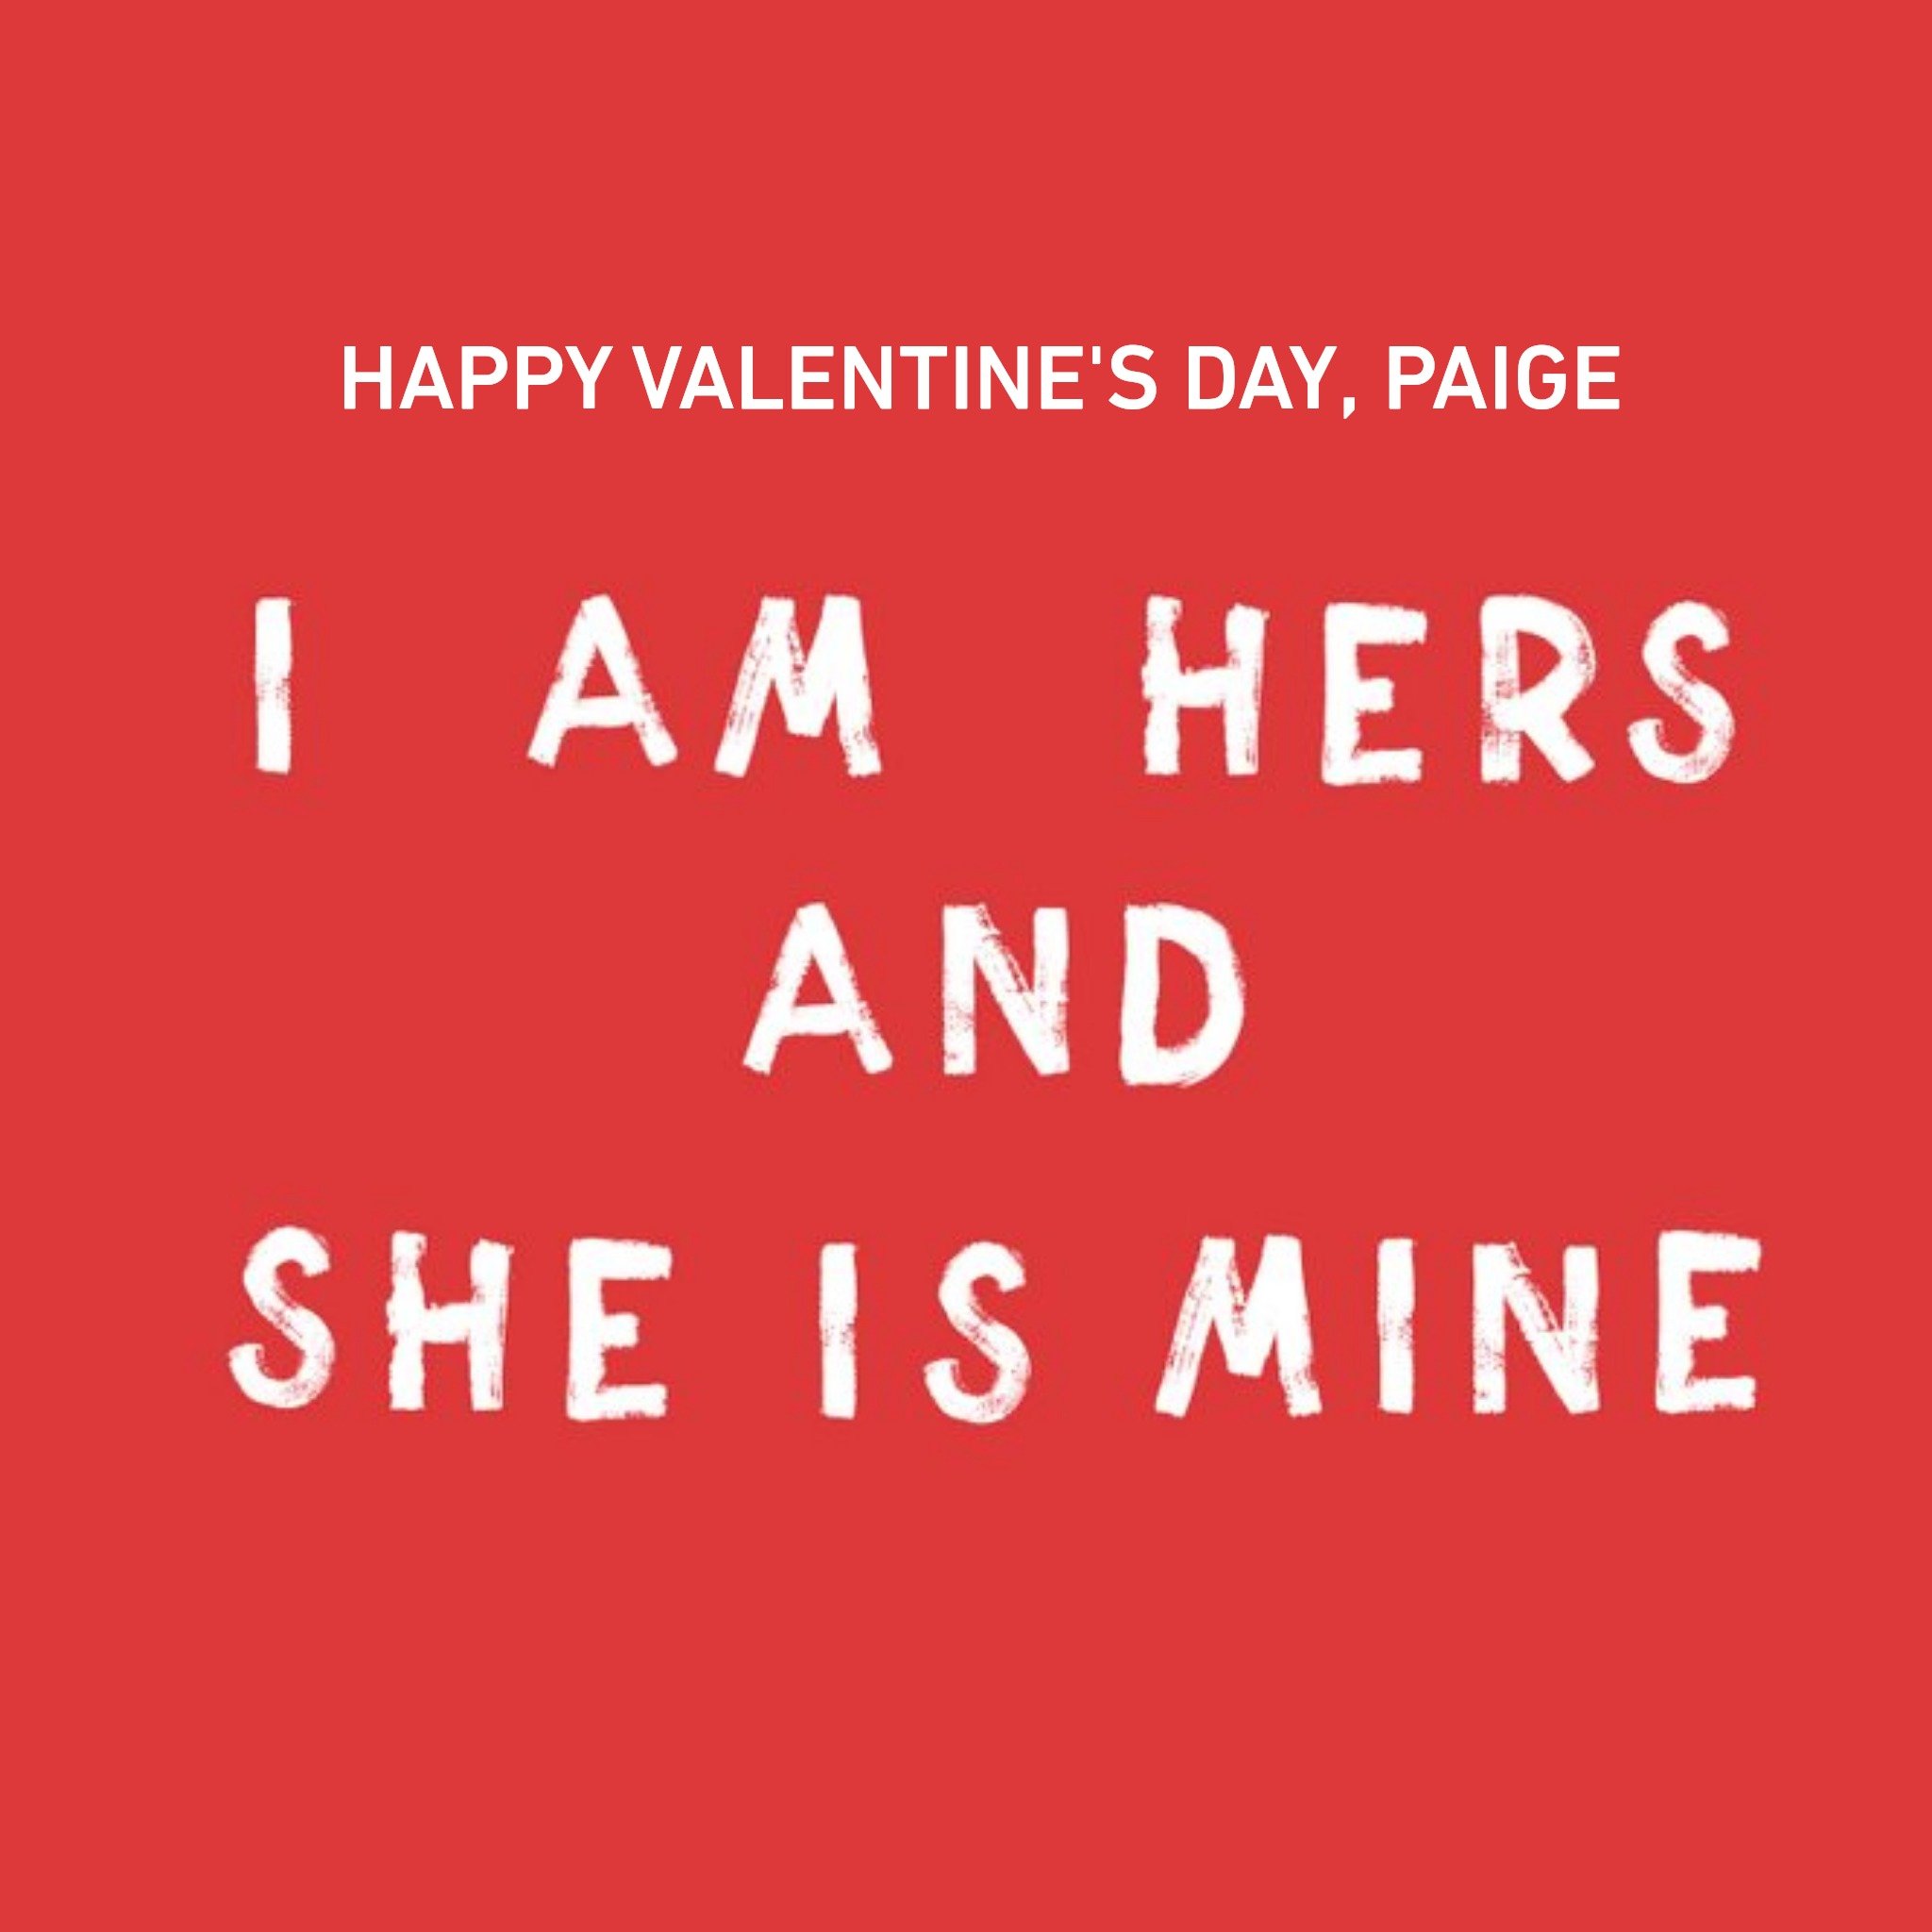 Moonpig Modern Design Typographic Red And White Lesbian Happy Valentines Day Card, Large